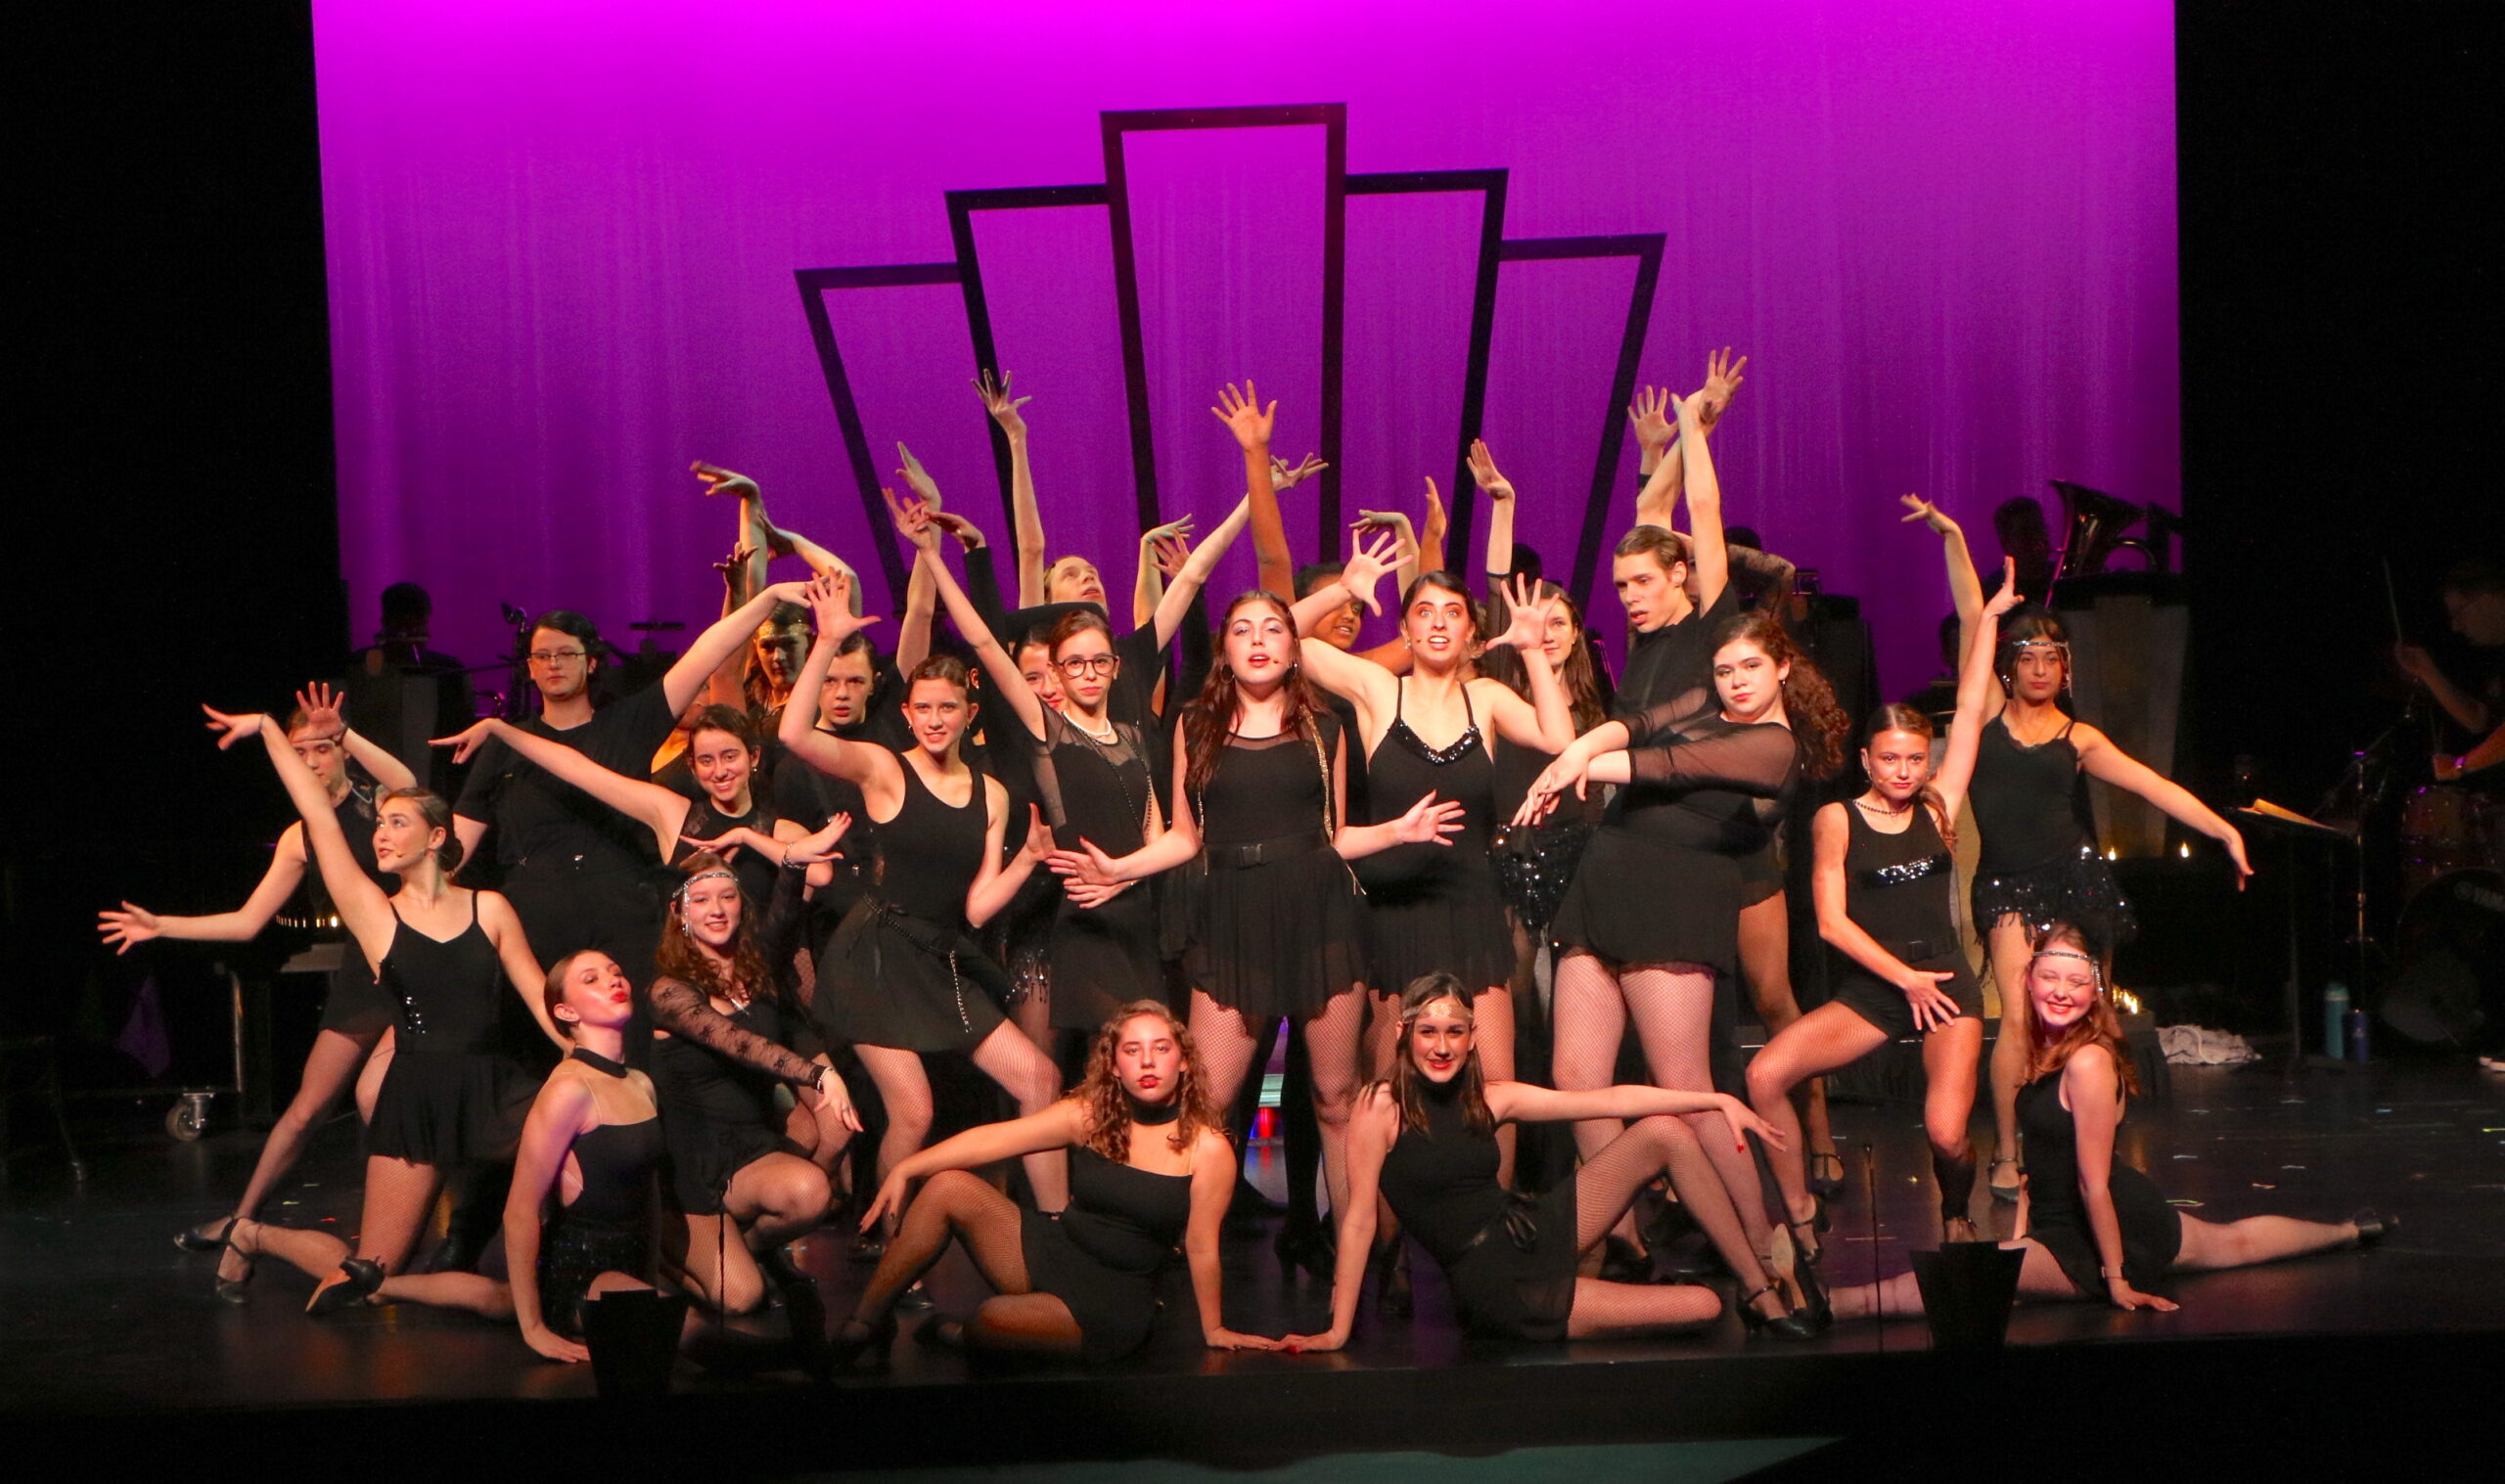 Chicago dance number - a bunch of girls dressed in black with a purple backgroud